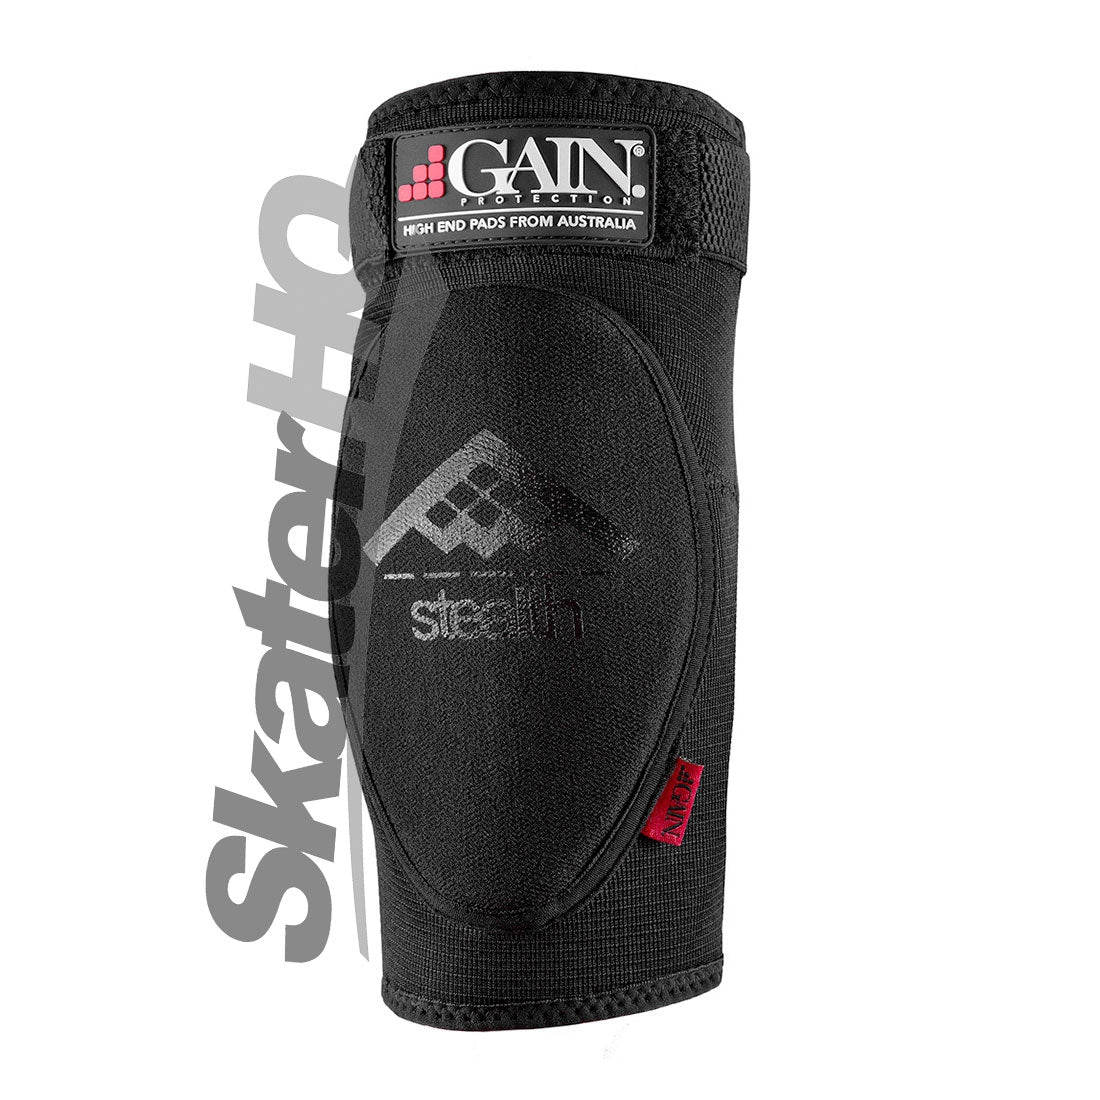 GAIN Stealth Elbow Pads - Black - XL Protective Gear